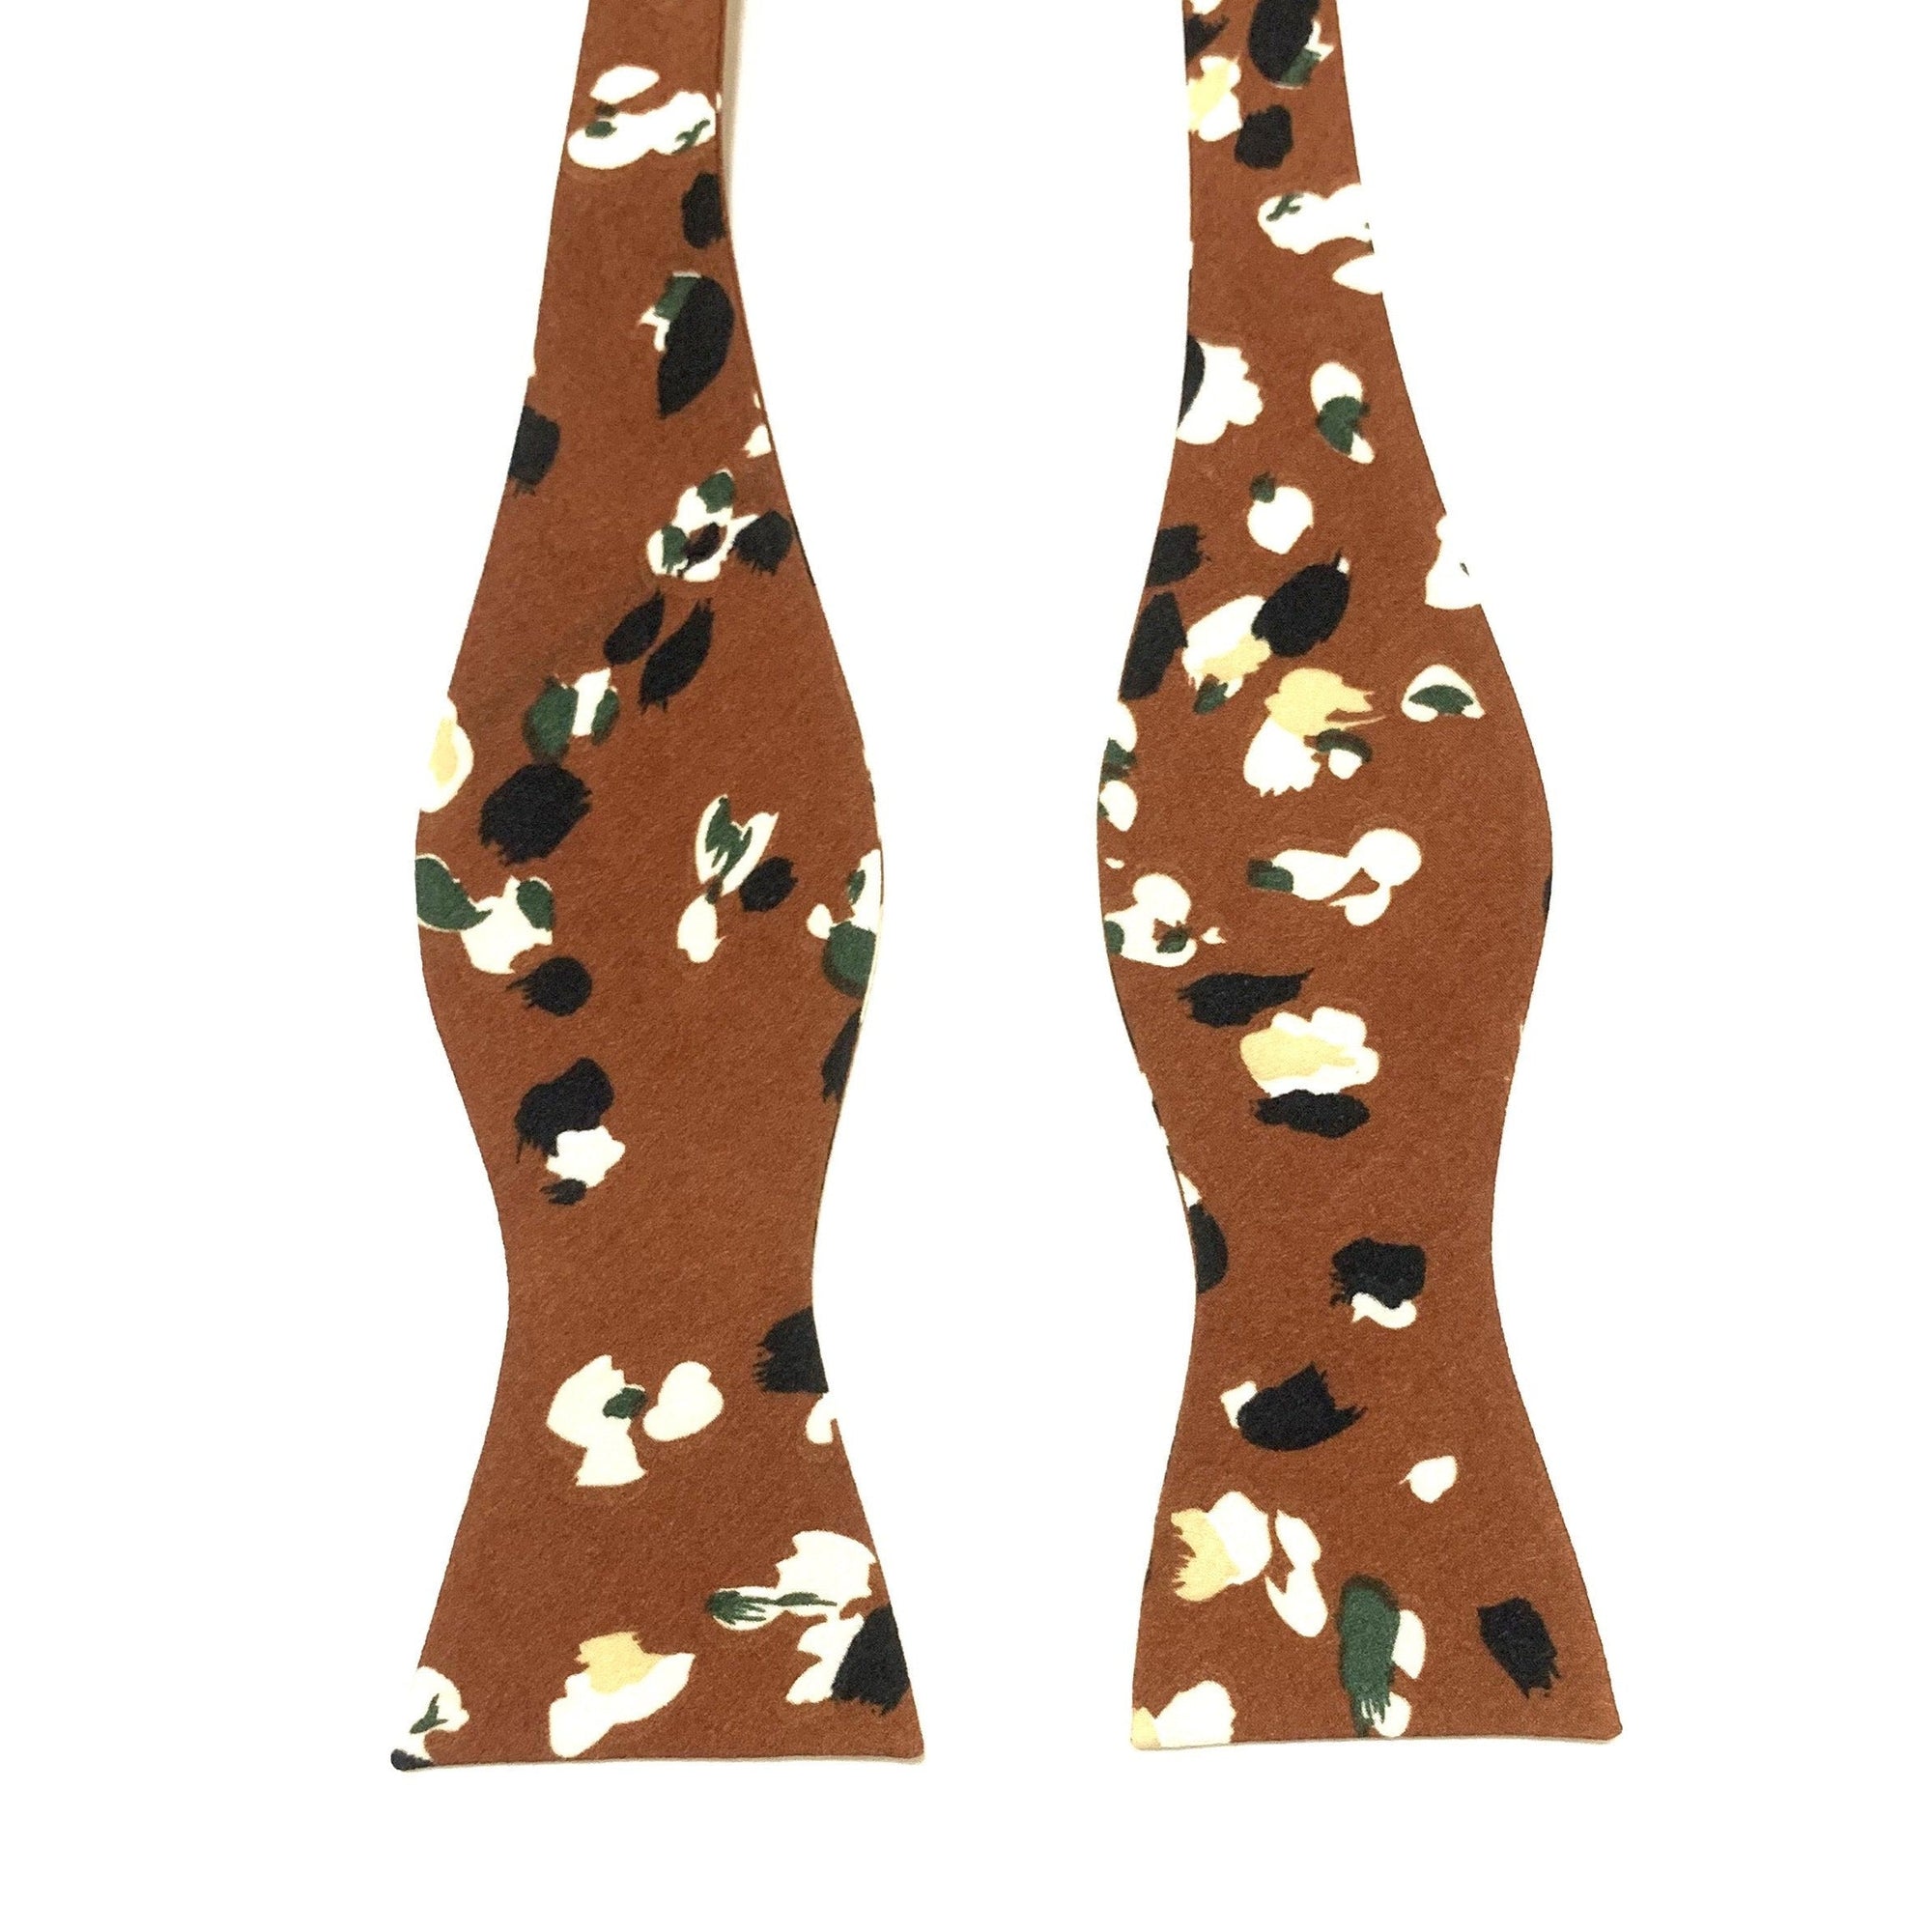 Terracotta Floral Bow Tie Self Tie PHOEBE - MYTIESHOP-Terracotta Floral Bow Tie Self Tie 100% Cotton Flannel Handmade Adjustable to fit most neck sizes 13 3/4" - 18" A dapper addition to any outfit, this PHOEBE bow tie is perfect for any formal occasion. With a floral pattern and self-tie design, this bow tie is perfect for taking your style up a notch. Whether you're dressing up for a wedding or dinner party, or just want a polished look for your next photo shoot, this bow tie will have you loo